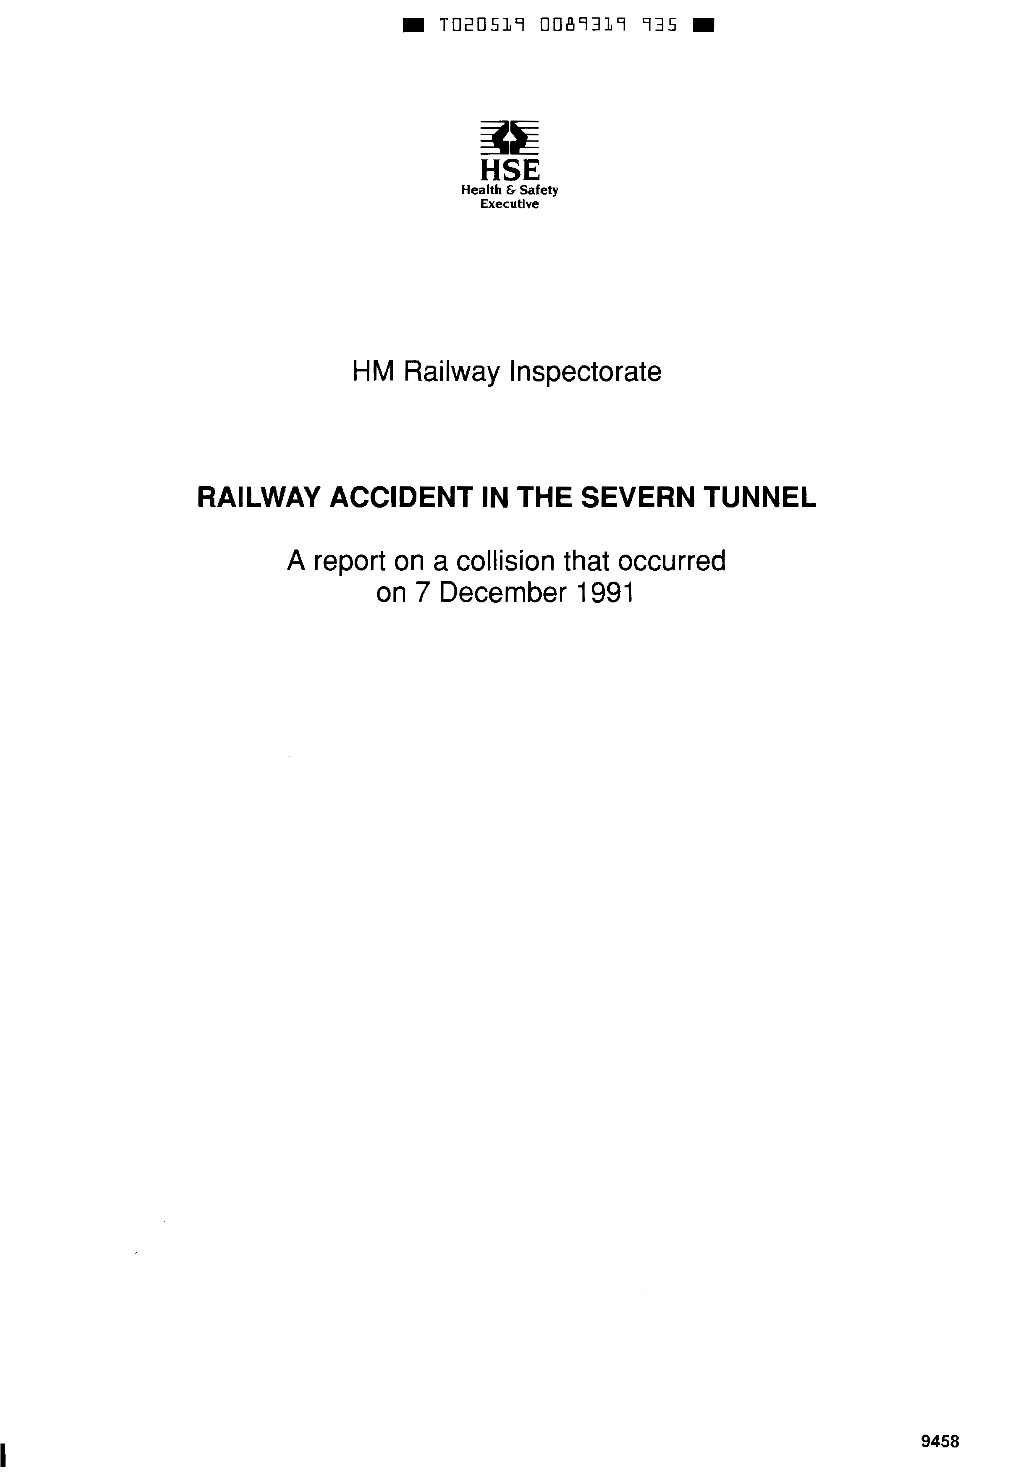 Railway Accident in the Severn Tunnel